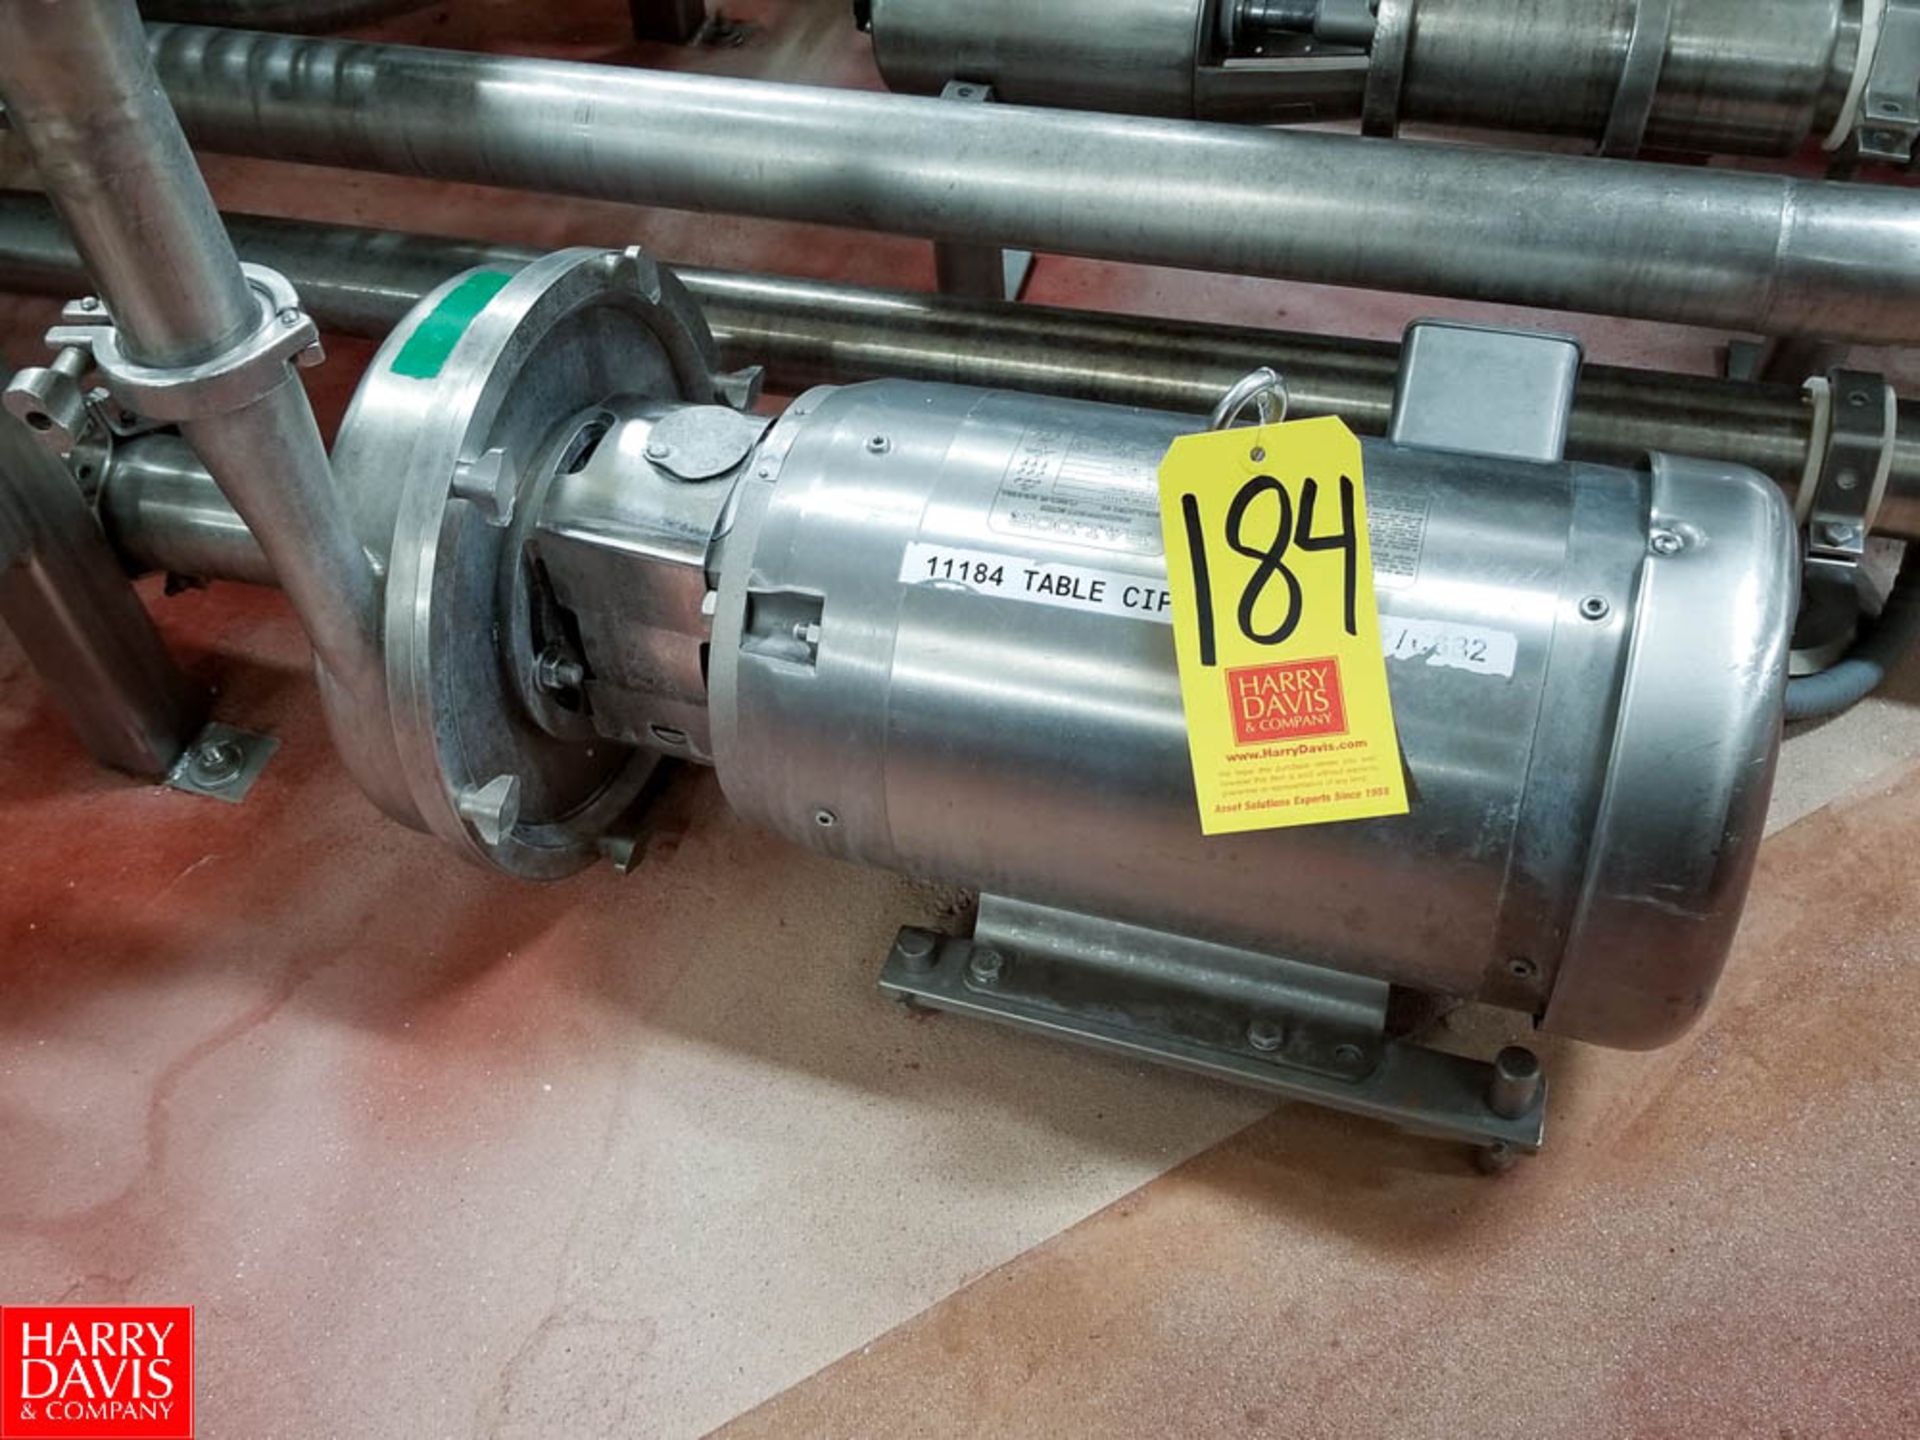 Centrifugal Pump with S/S Clad 7.5 HP Baldor 1765 RPM Motor - Rigging Fee: $25